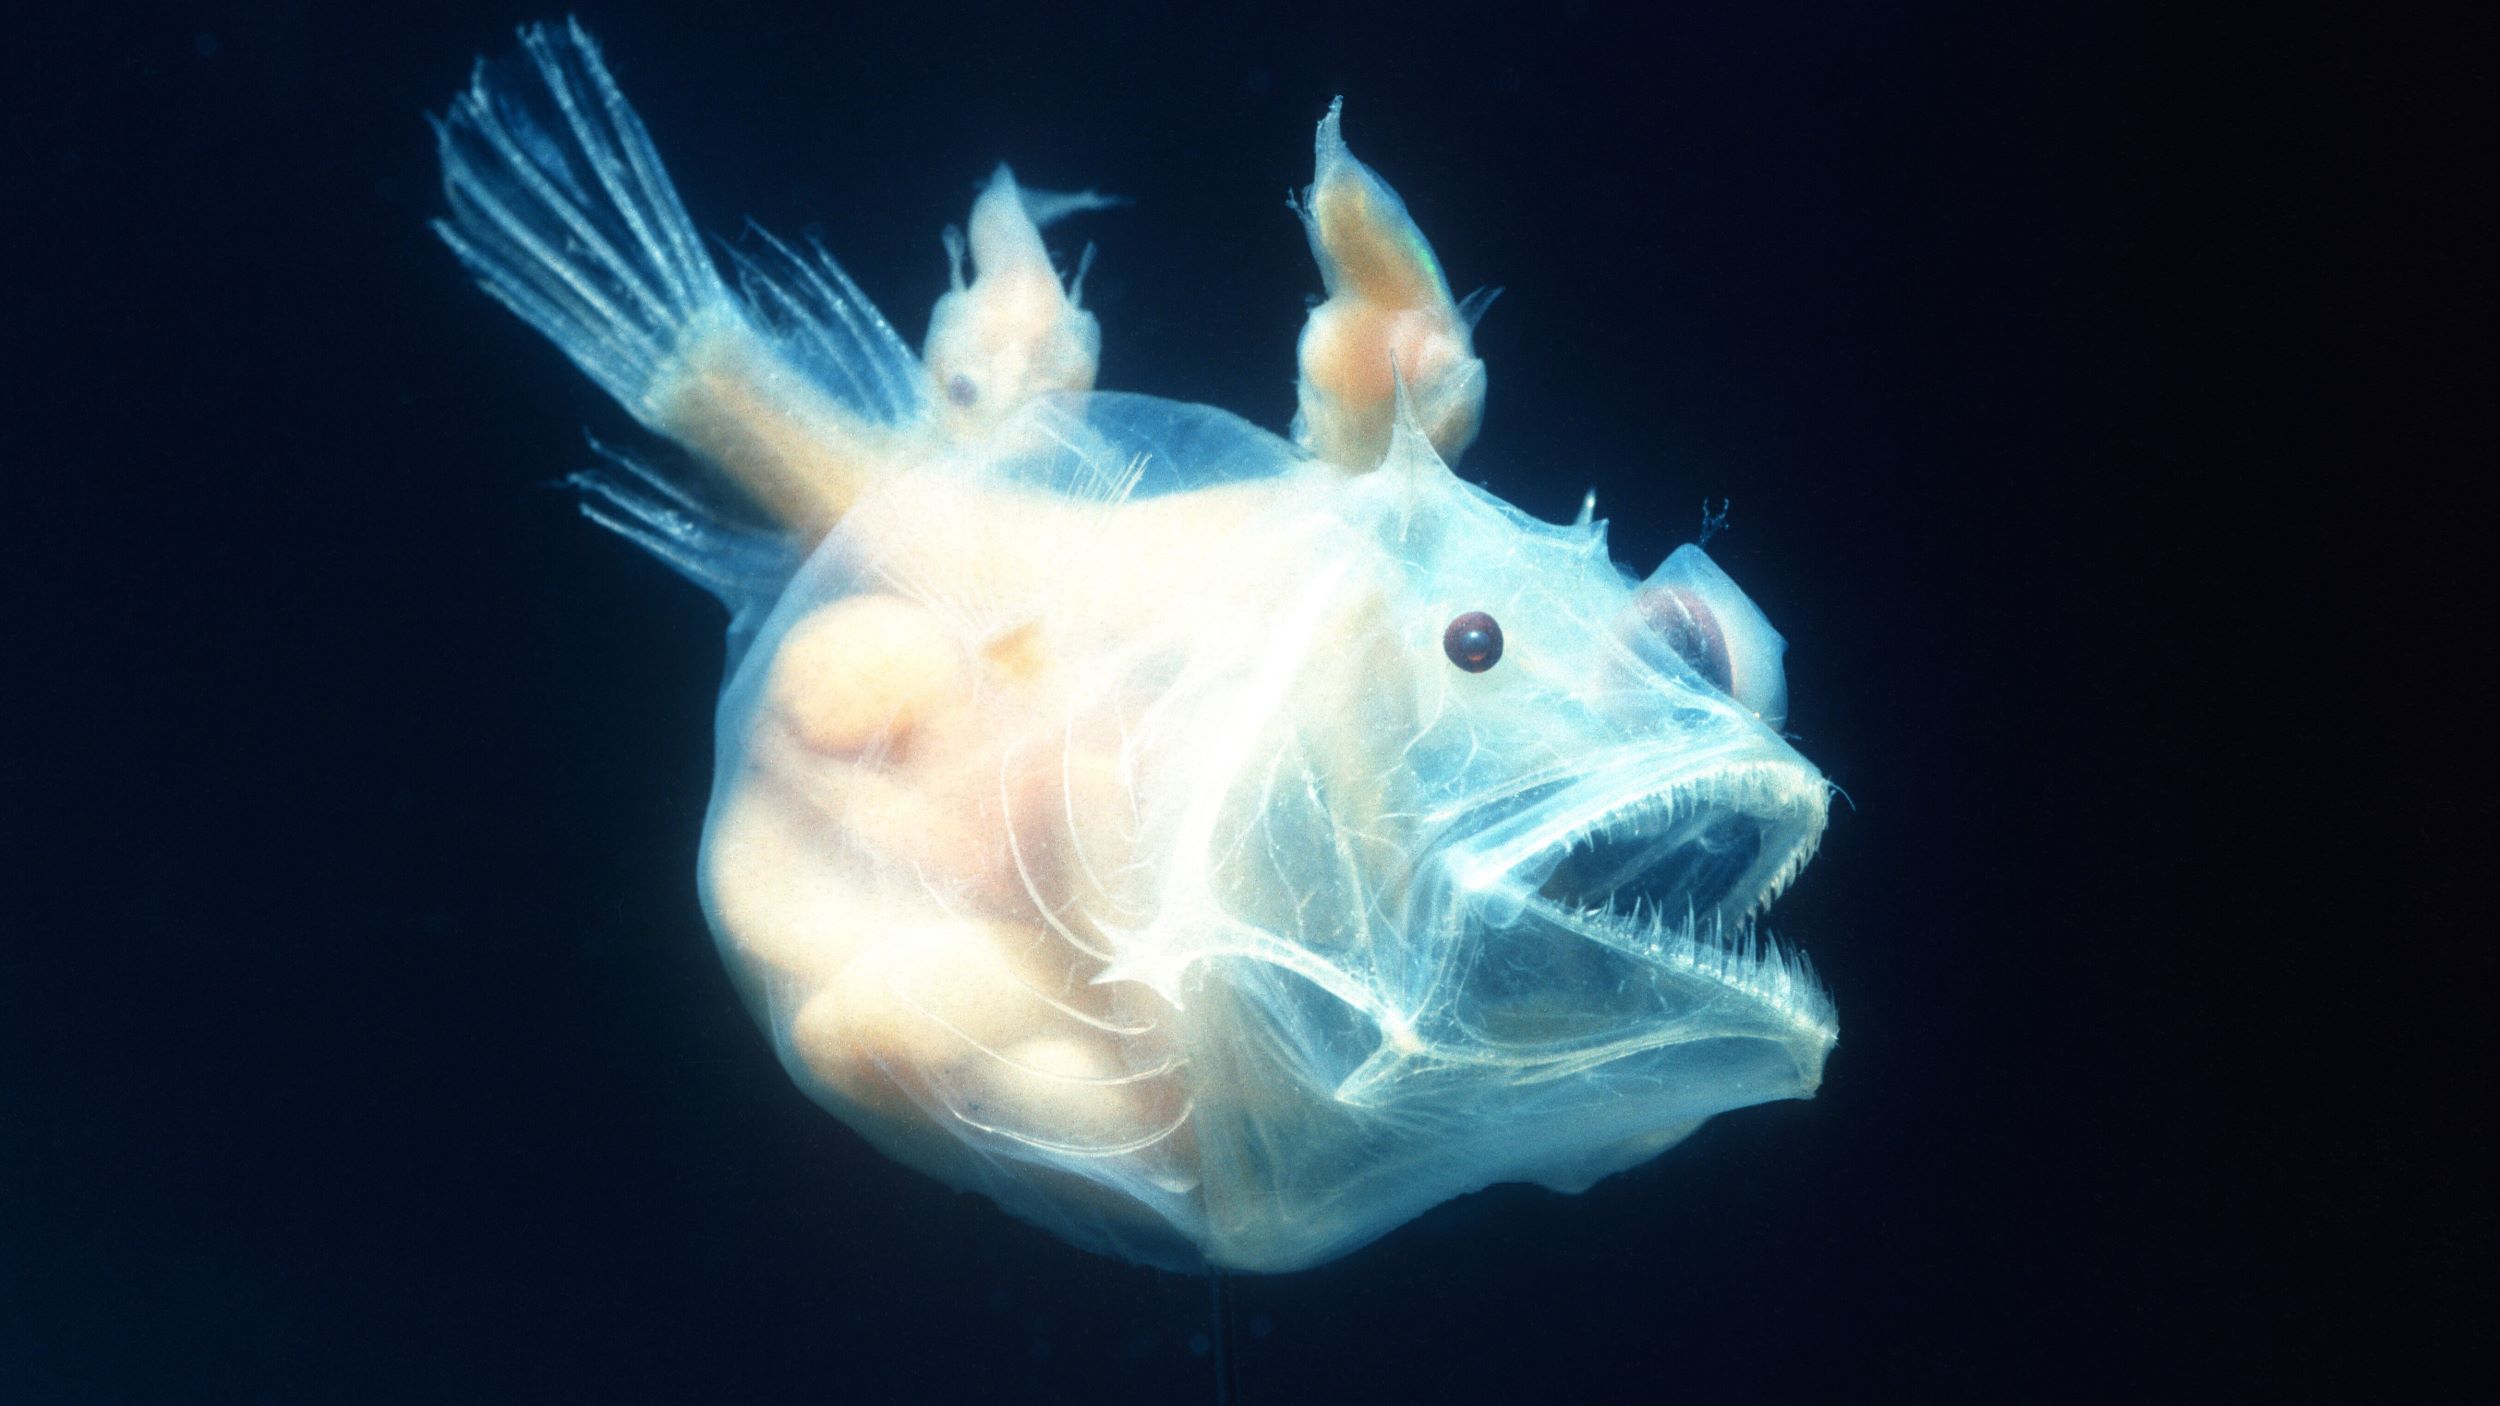 anglerfish entered the midnight zone 55 million years ago and thrived by becoming sexual parasites